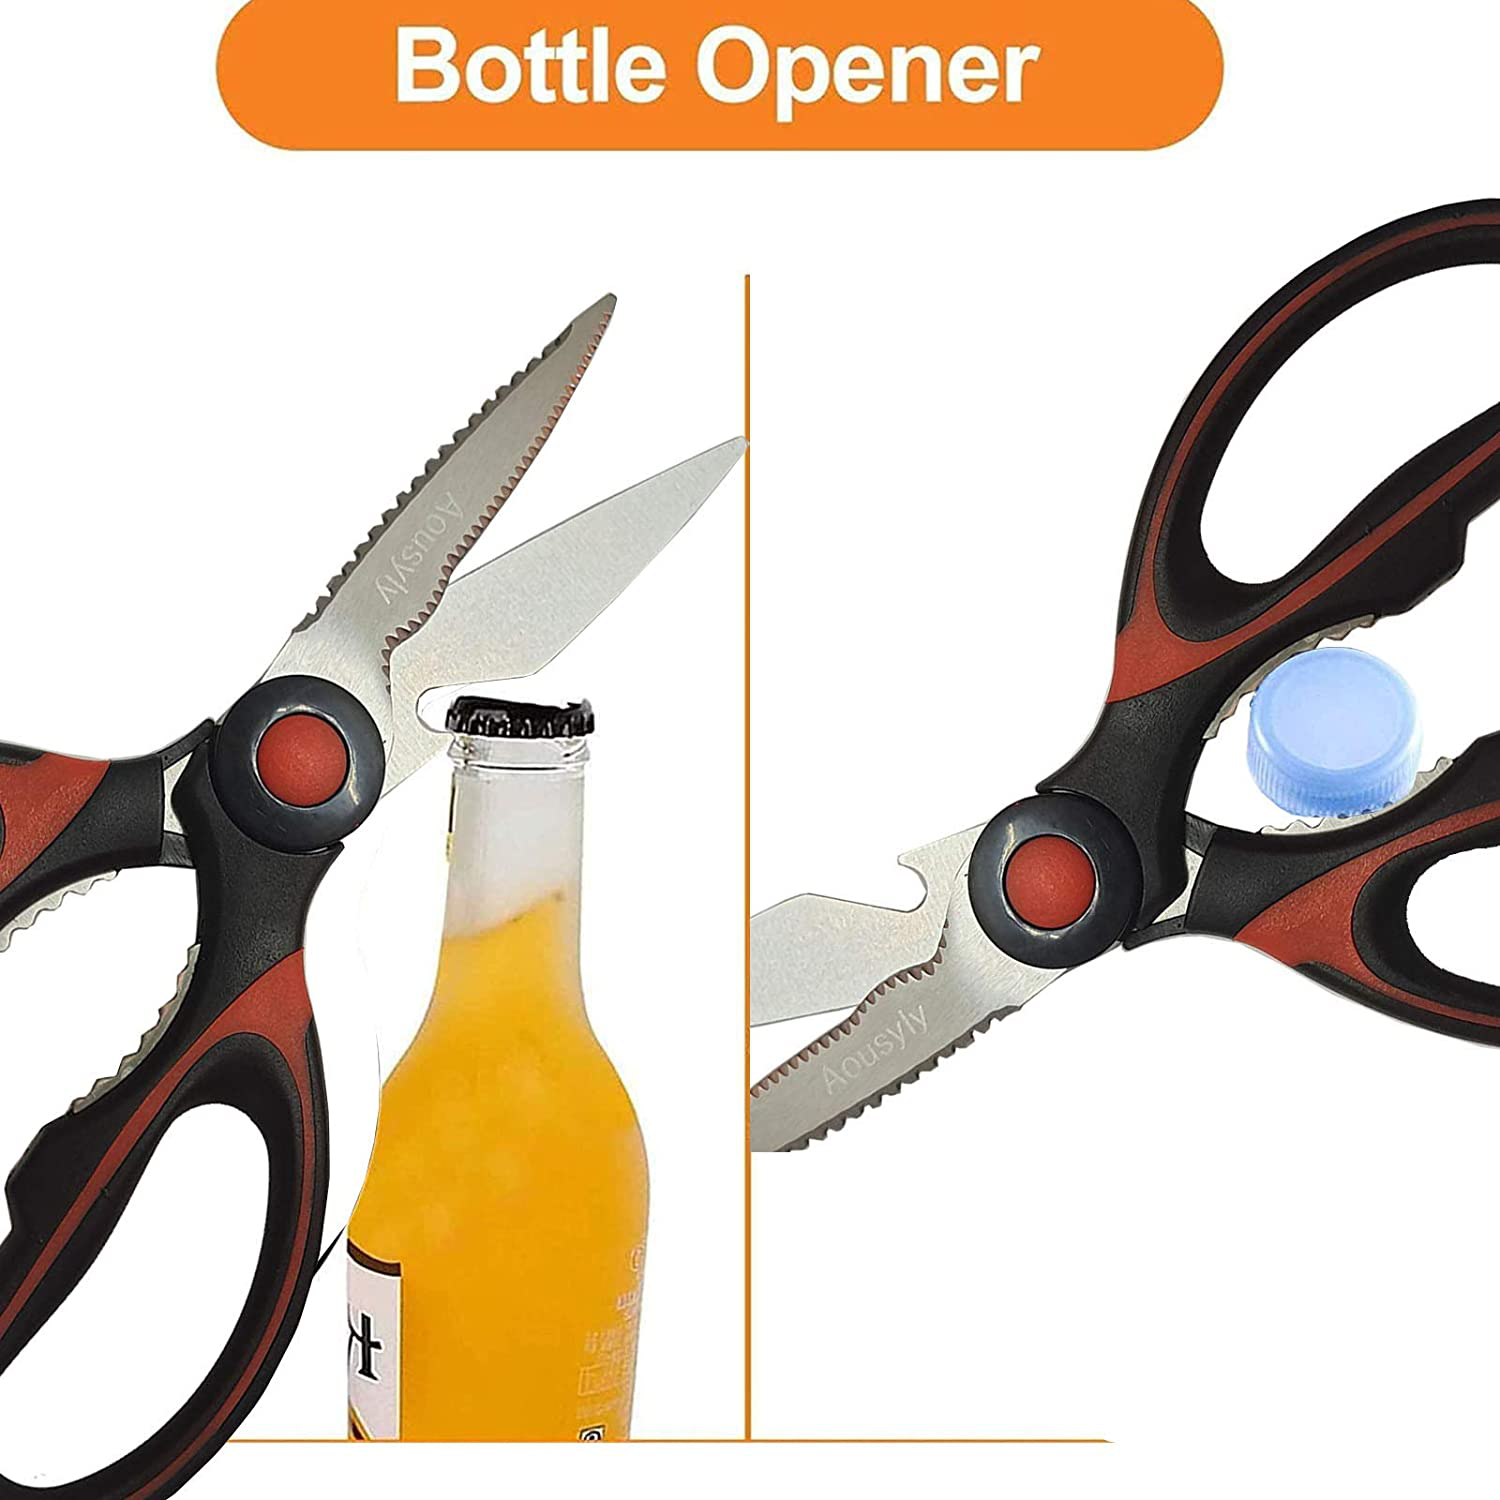 Aousyly Kitchen Scissors Heavy Duty Kitchen Shears Dishwasher Safe Multipurpose Stainless Steel Cooking Shears Scissors for Cutting Meat/Chicken/Fish/Poultry/Vegetables/BBQ/Nuts/Open Jars